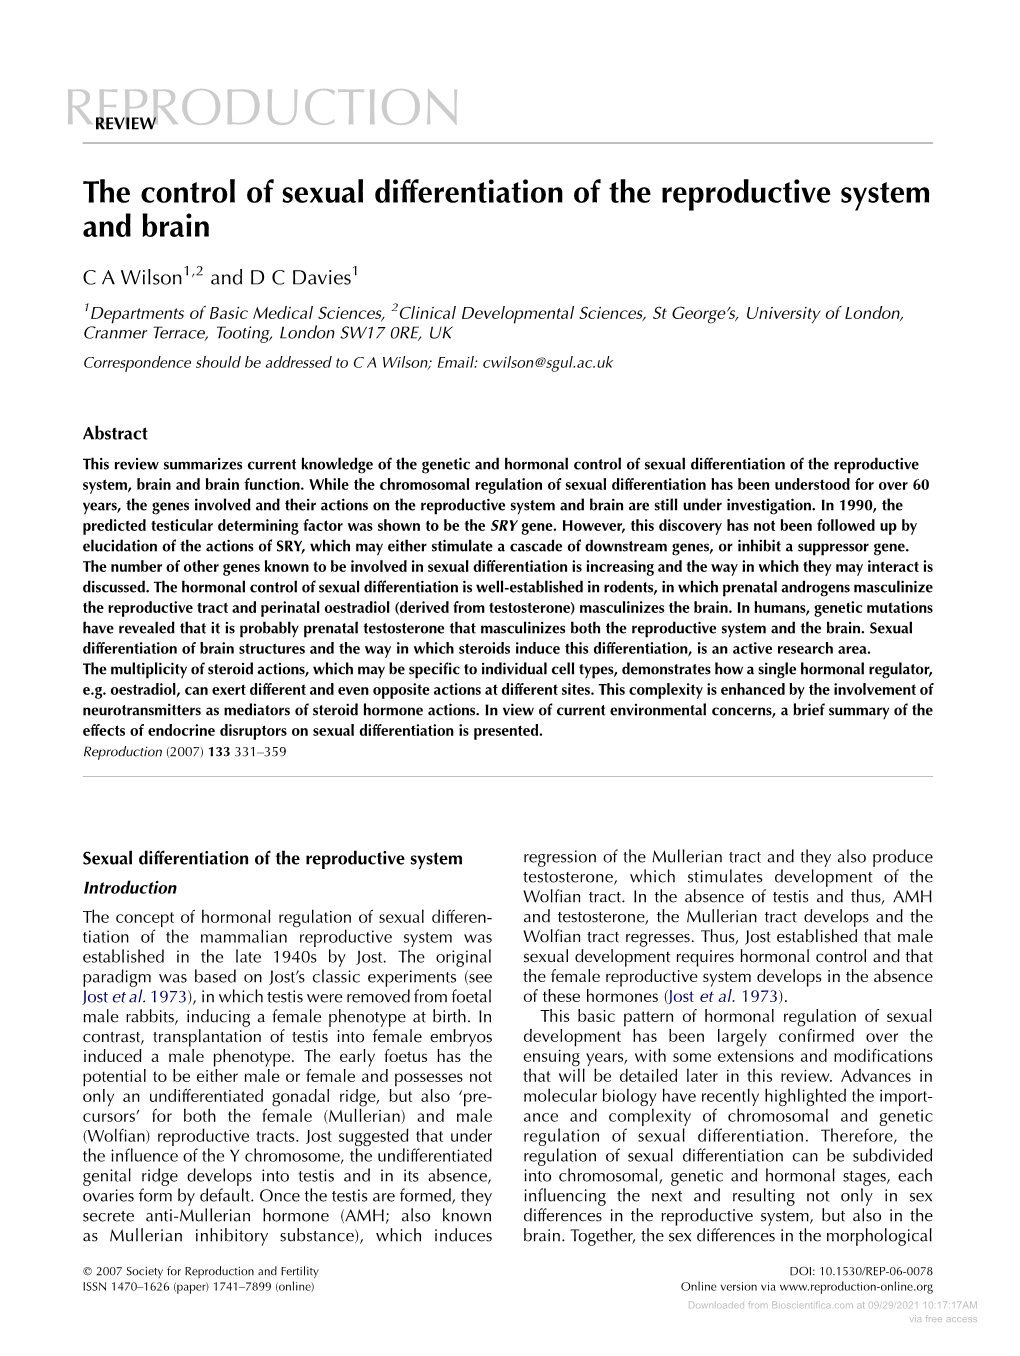 The Control of Sexual Differentiation of the Reproductive System and Brain